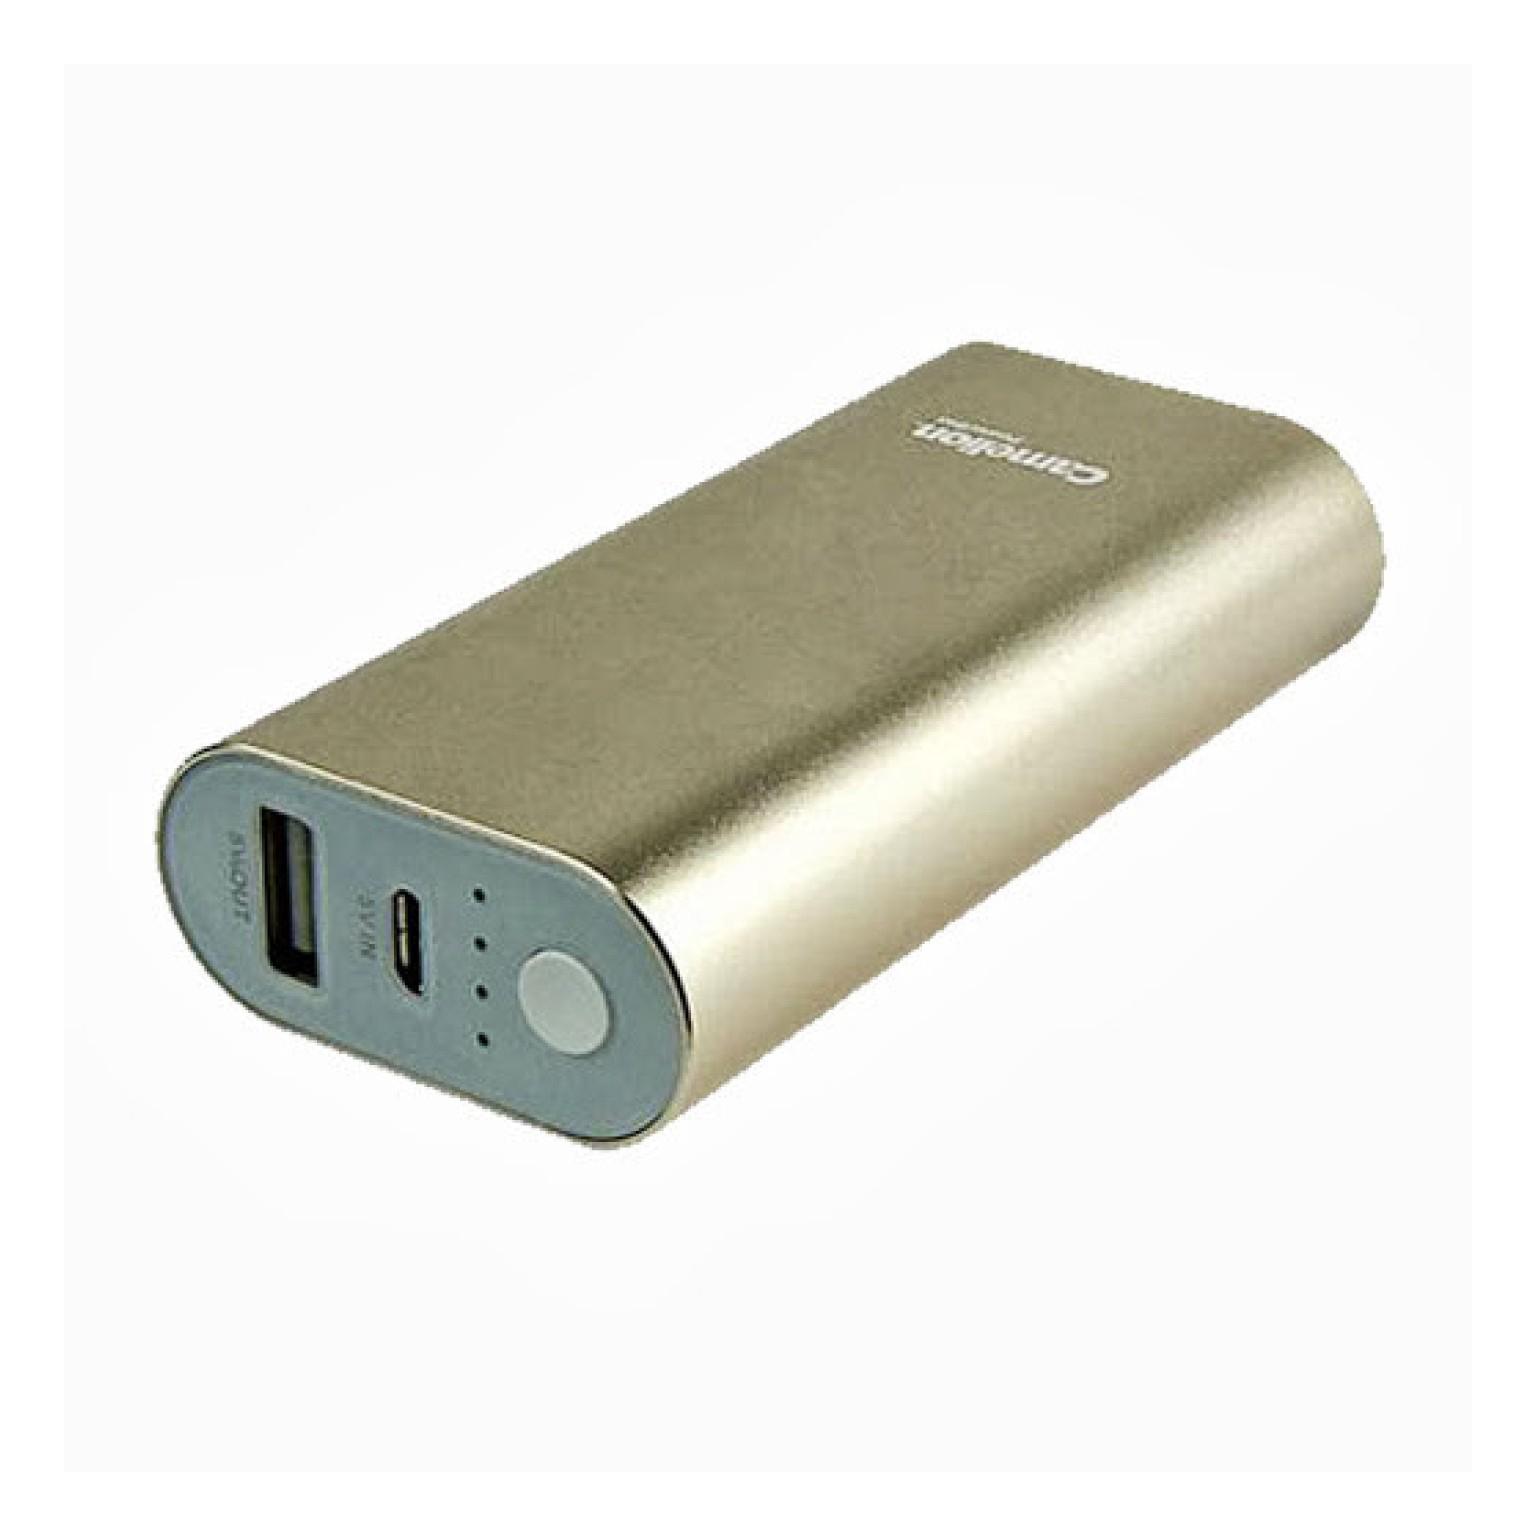 Image of Camelion Powerbank PS626 6600mAh (Gold) - Camelion